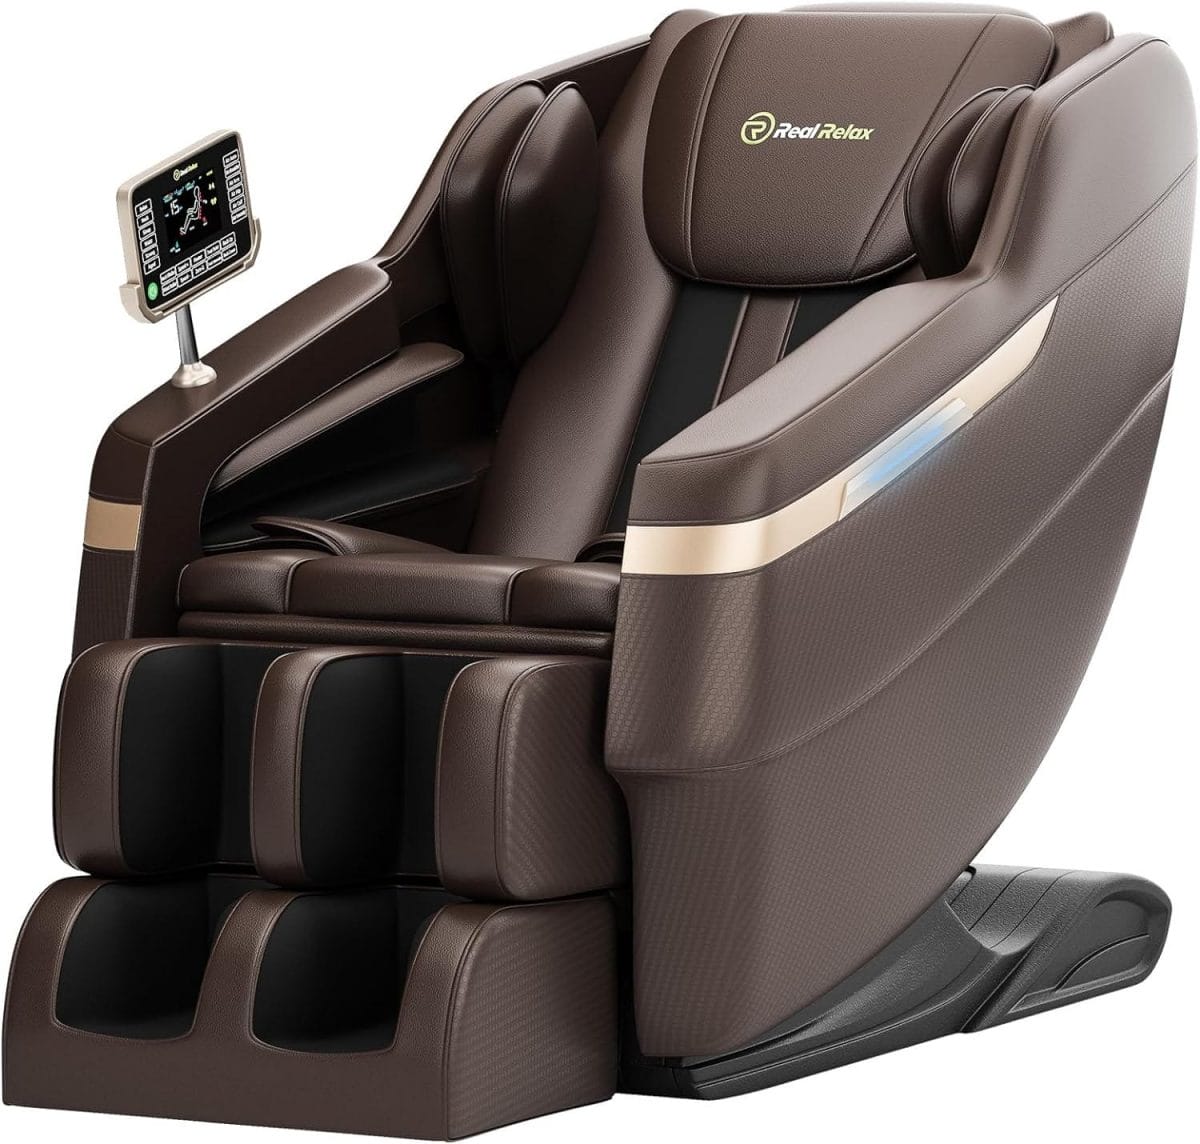 Real Relax FBM-B02300D-02 2023 Full Body Massage Chair, Brown